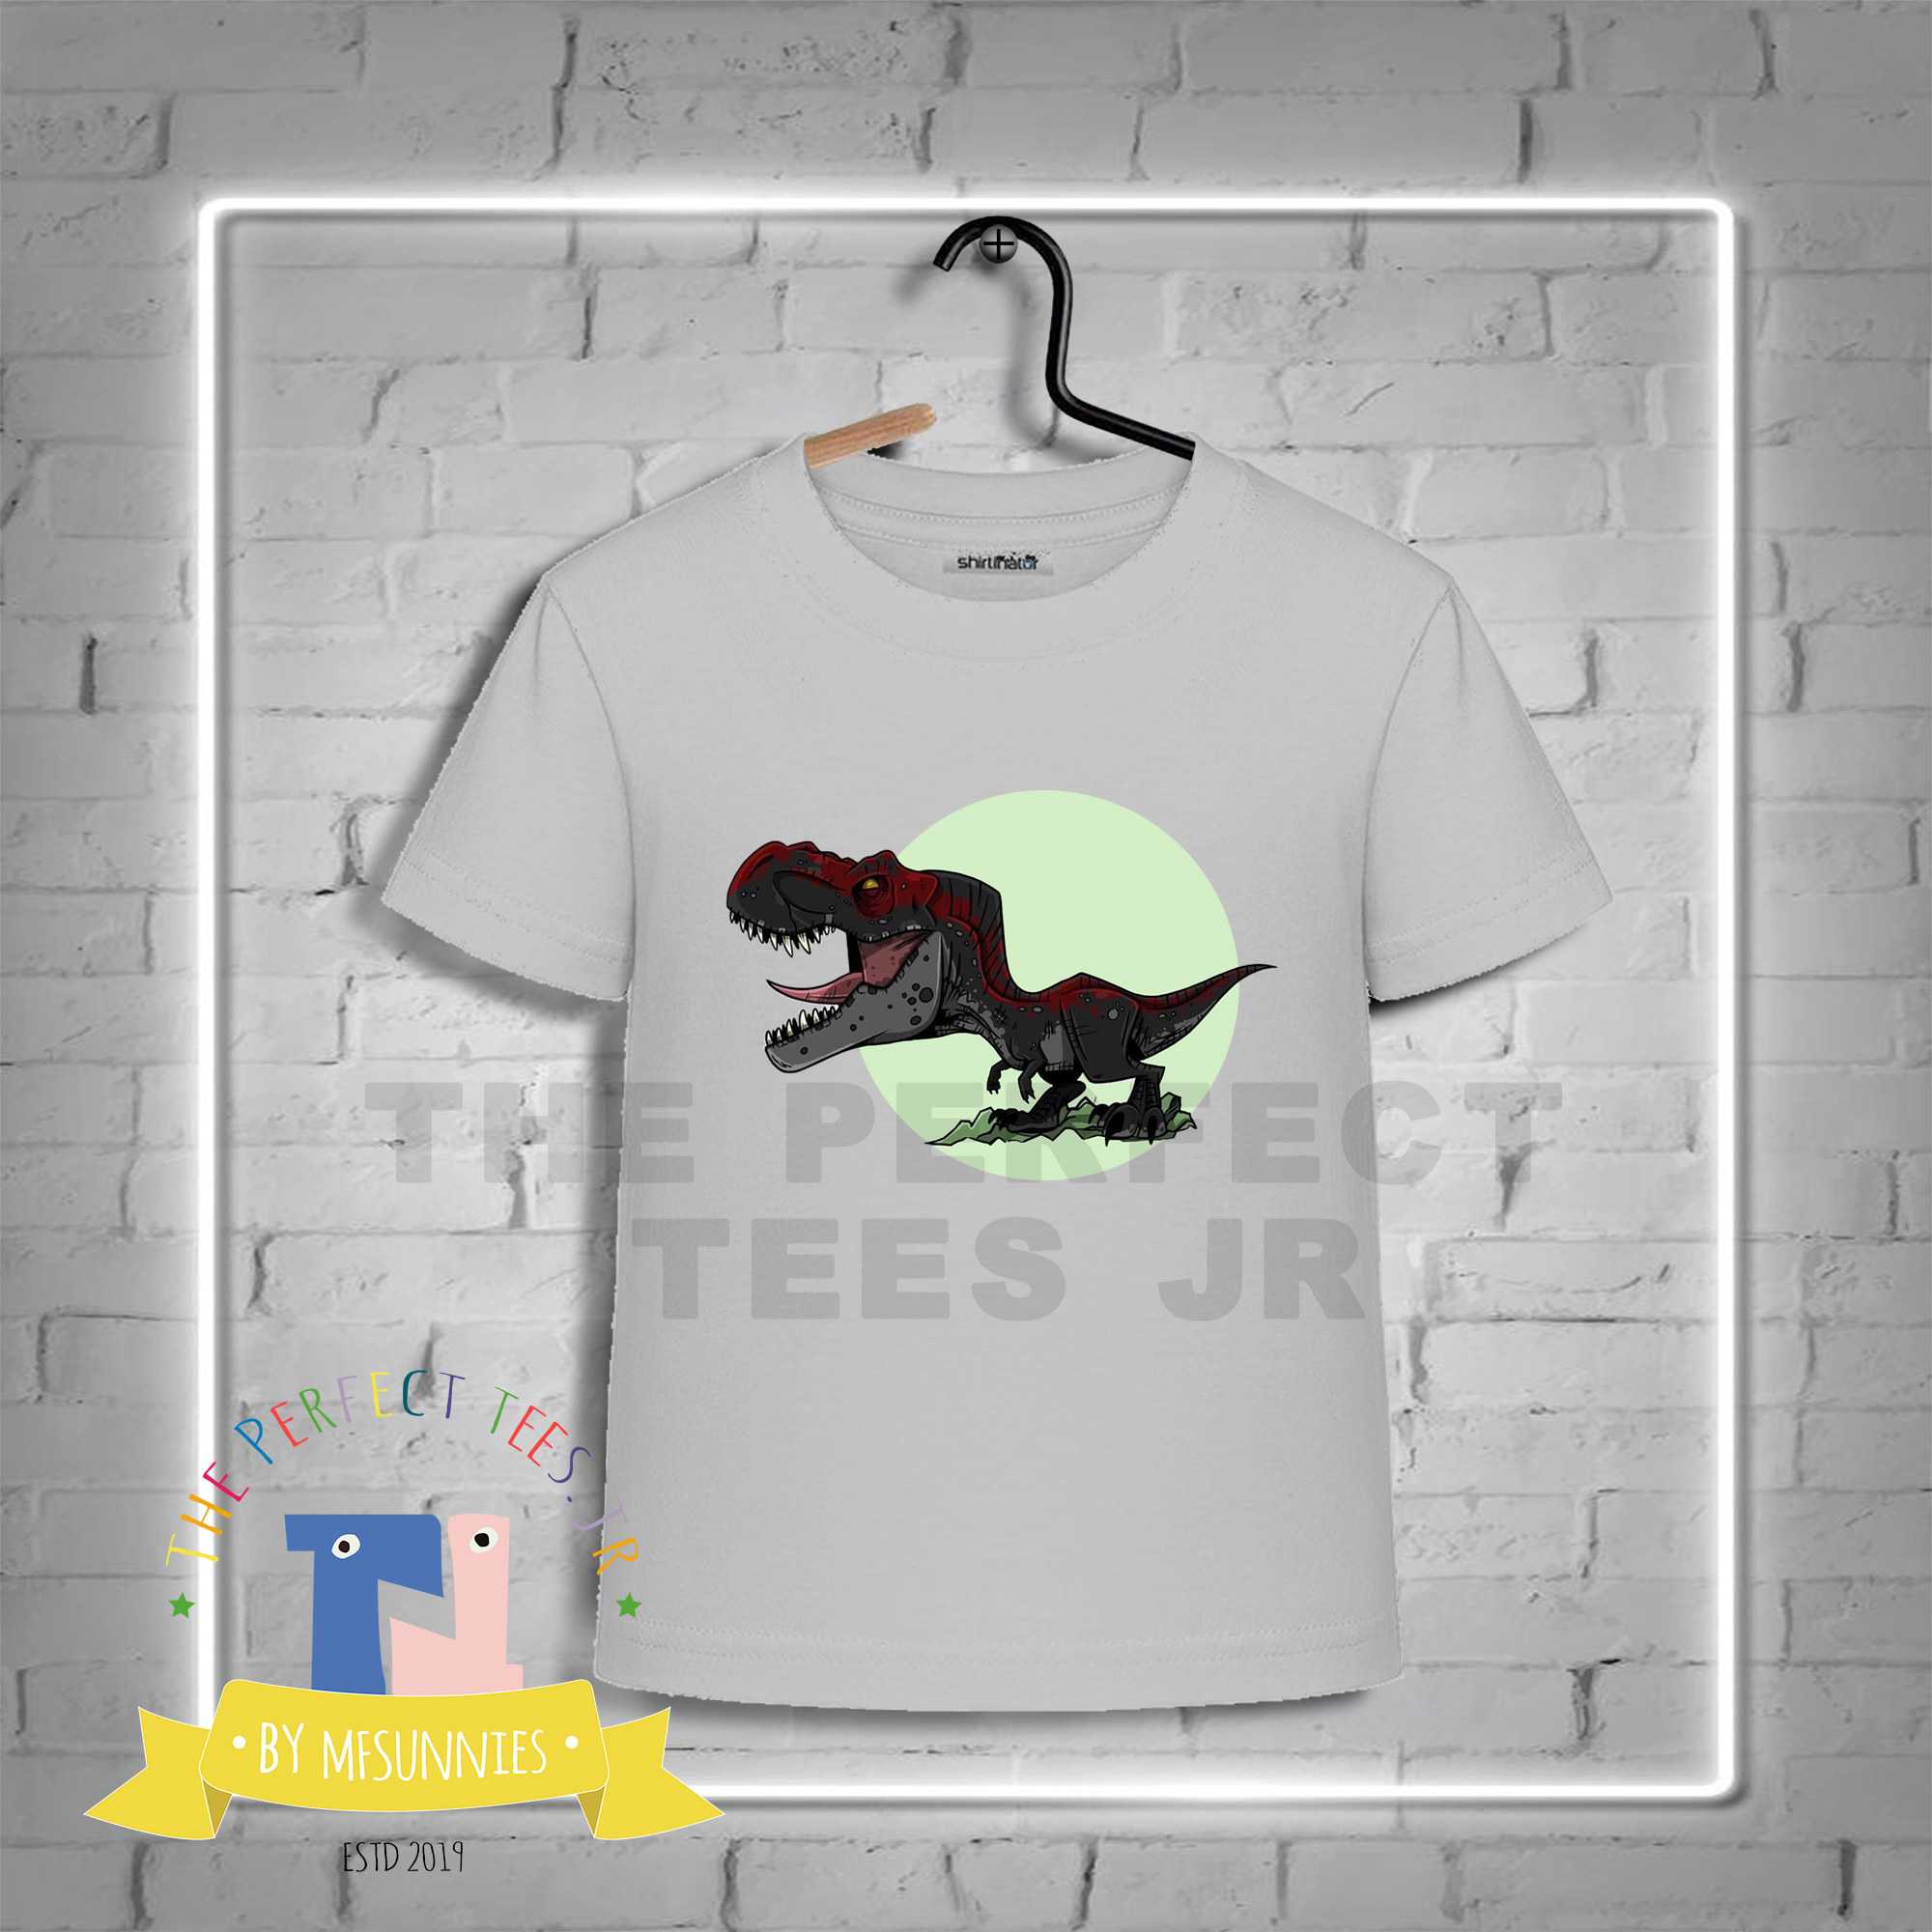 Boys Shirts For Sale T Shirts For Boys Online For Sale With Great Prices Deals Lazada Com Ph - 4 13yrs girls boys game roblox t shirt kids t shirt child unisex